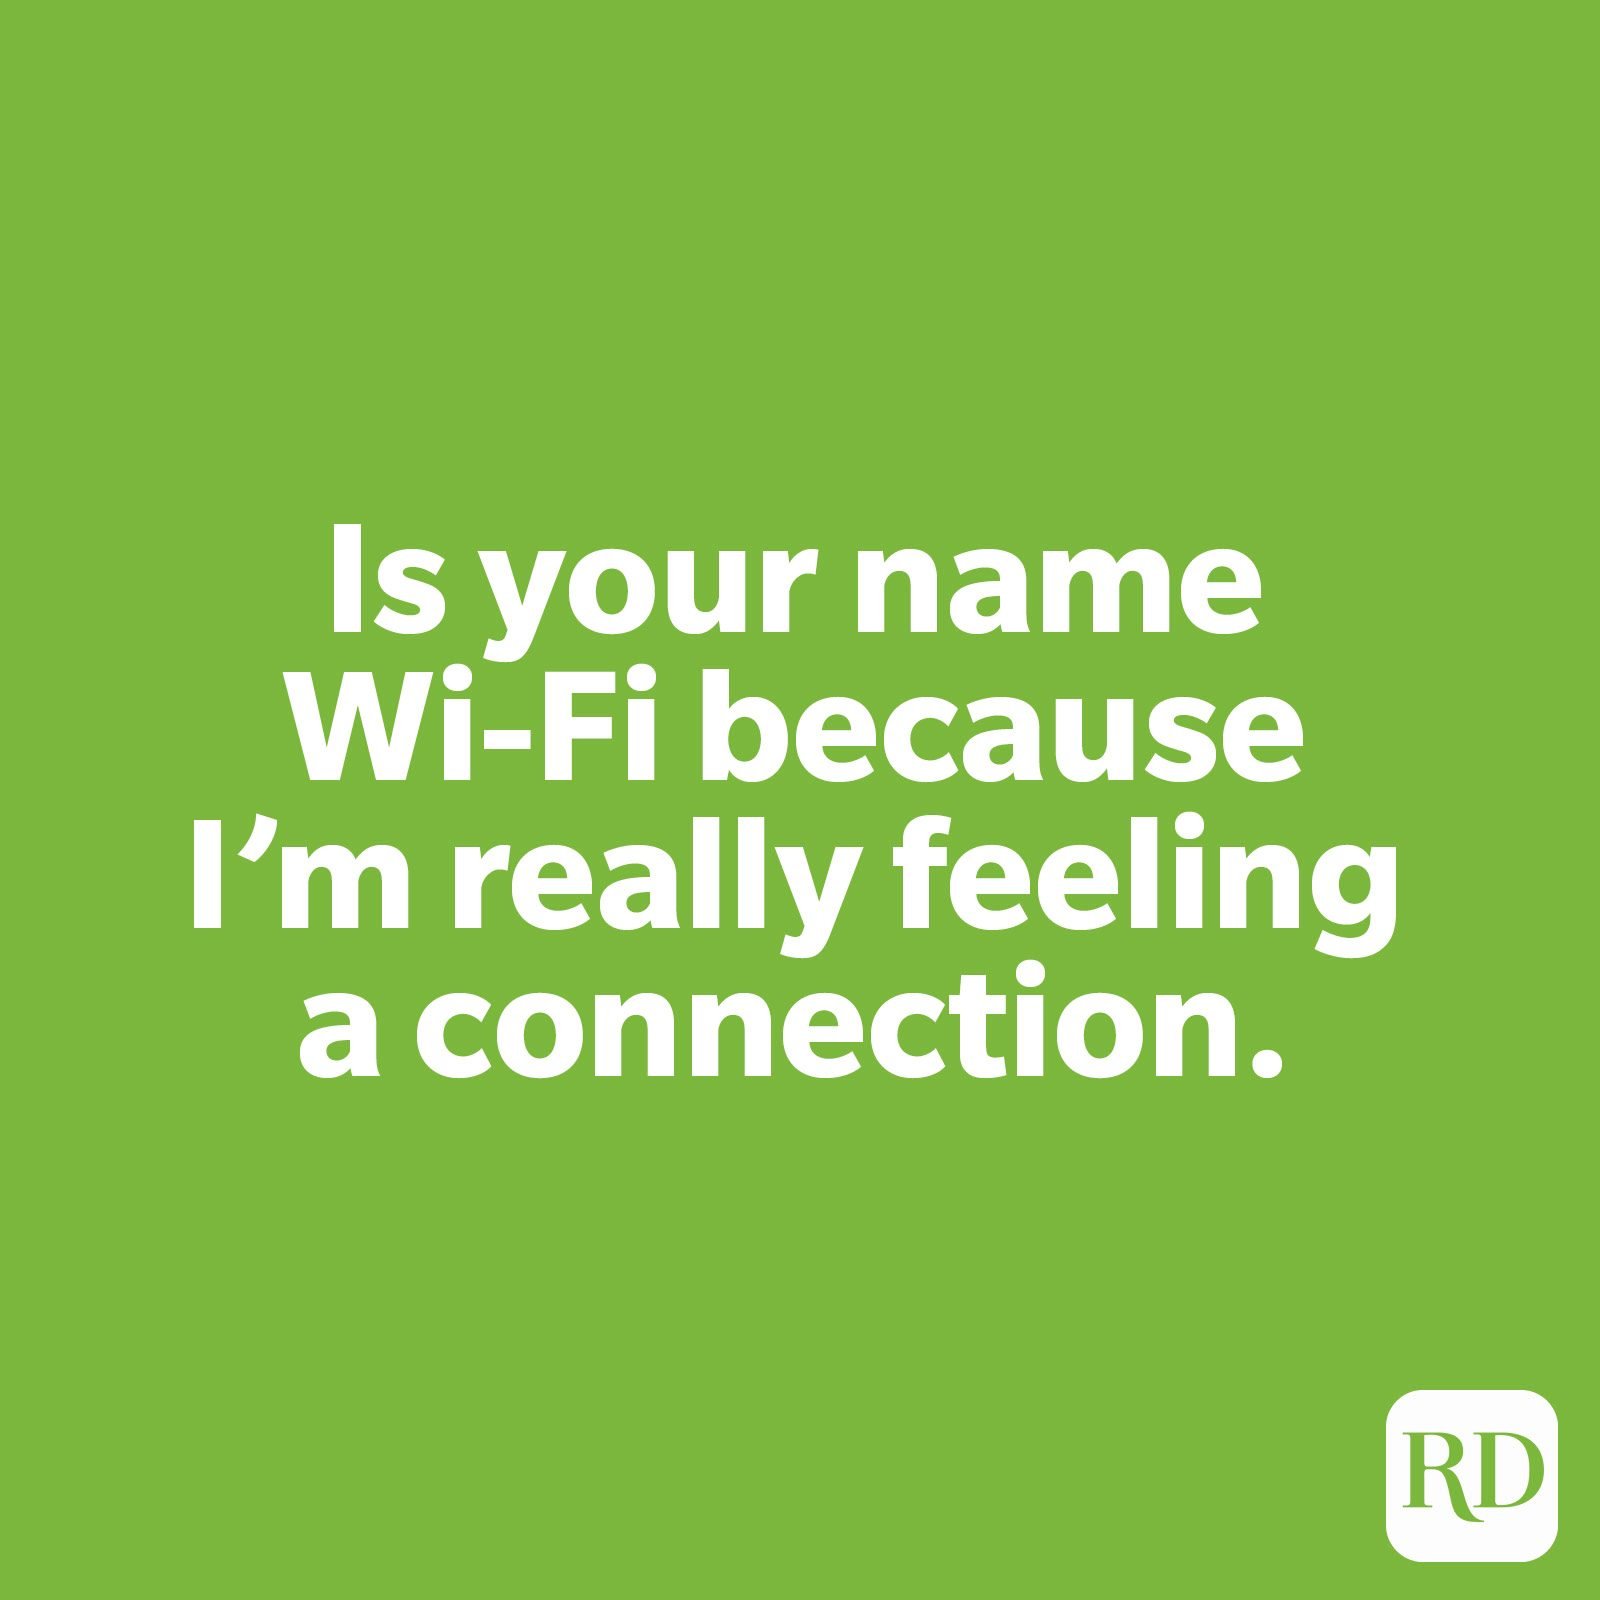 Is your name Wi-Fi because I'm really feeling a connection.